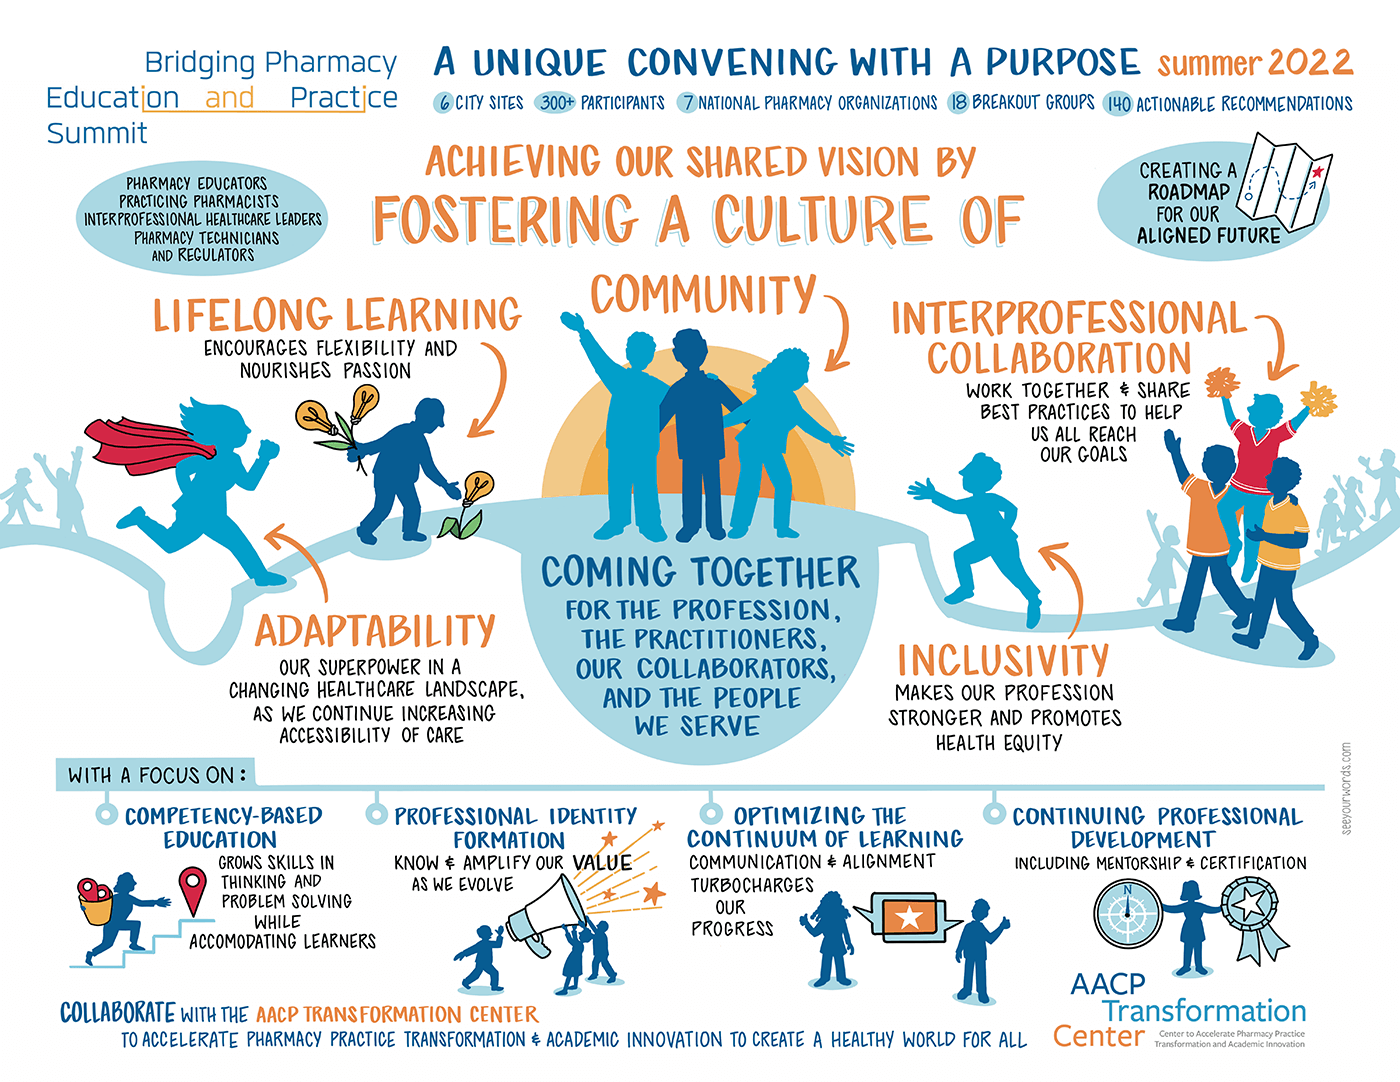 Visualization highlighting the purpose and conversations that took place around the four topics as well as the importance of lifelong learning, interprofessional collaboration, adaptability and inclusivity.